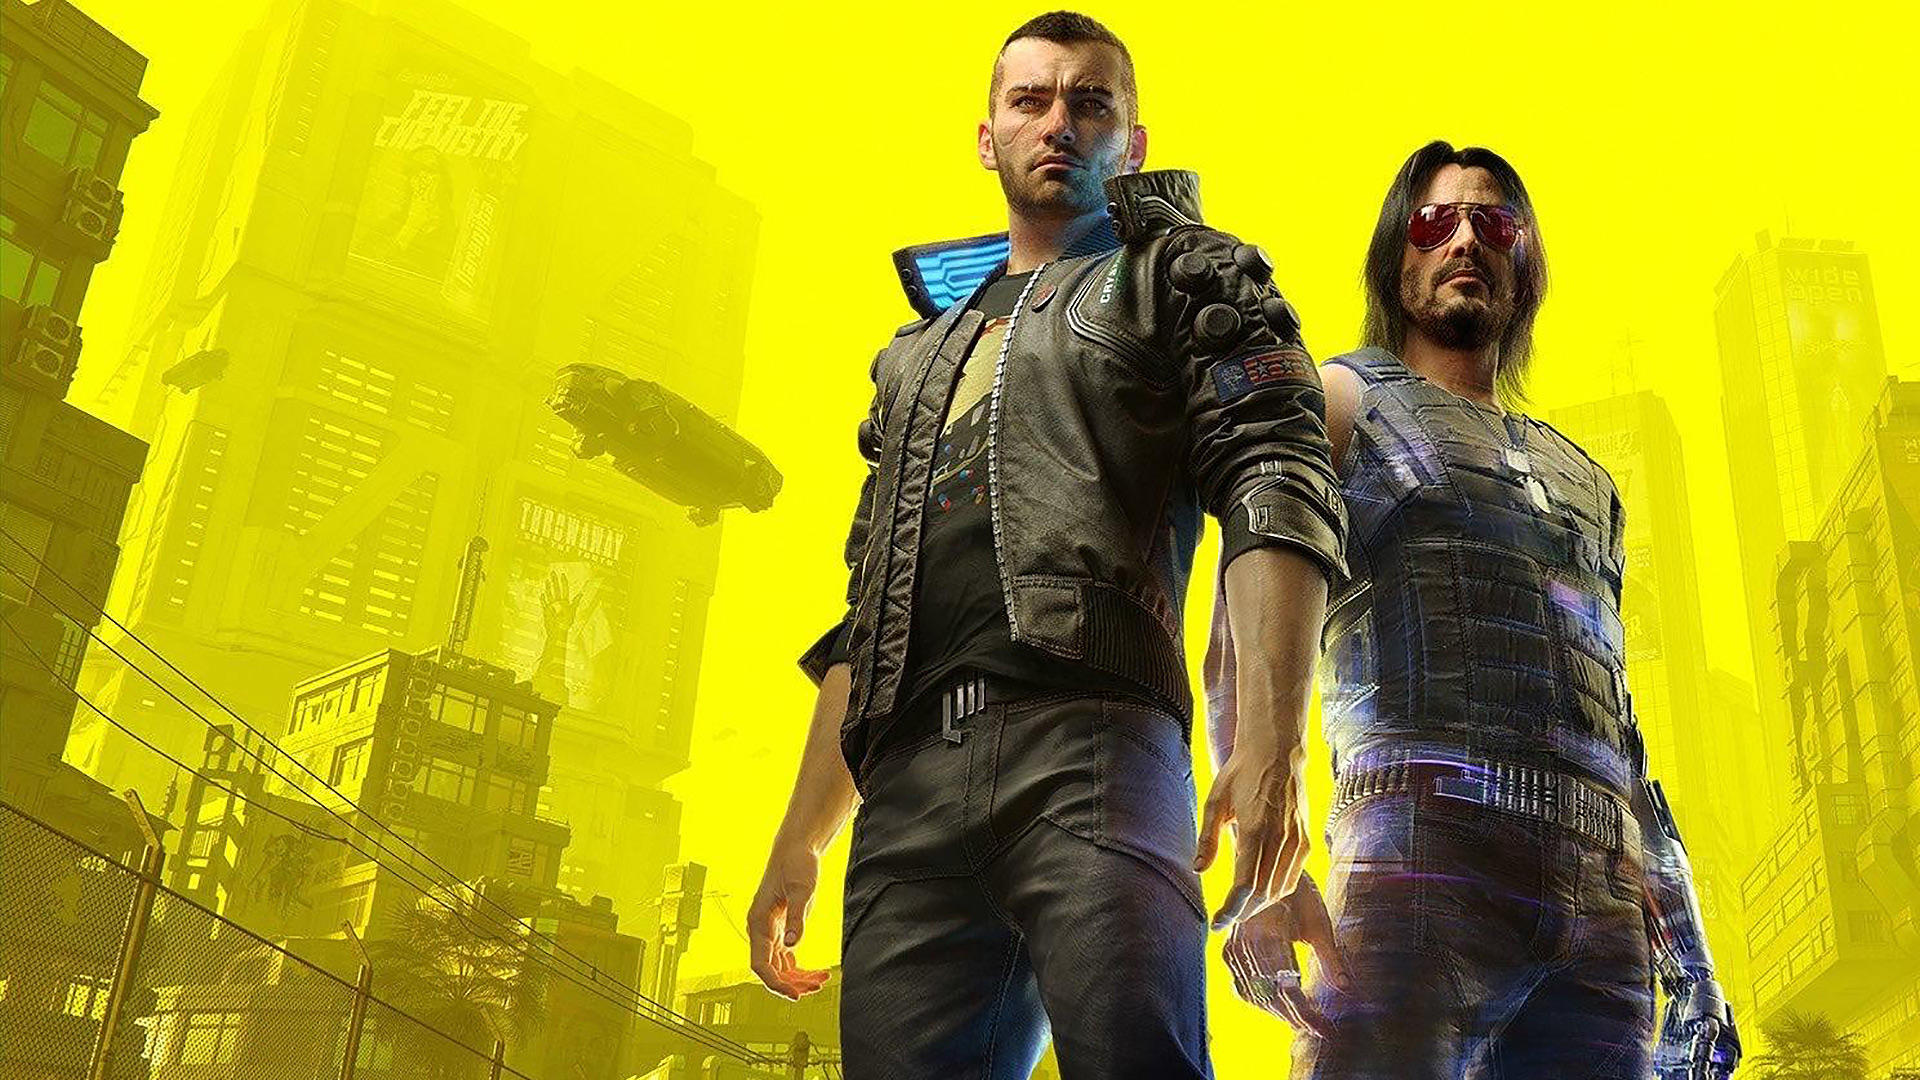 Cyberpunk 2077 Releases On December 9 In Some Time Zones As CDPR Reveal Global Release